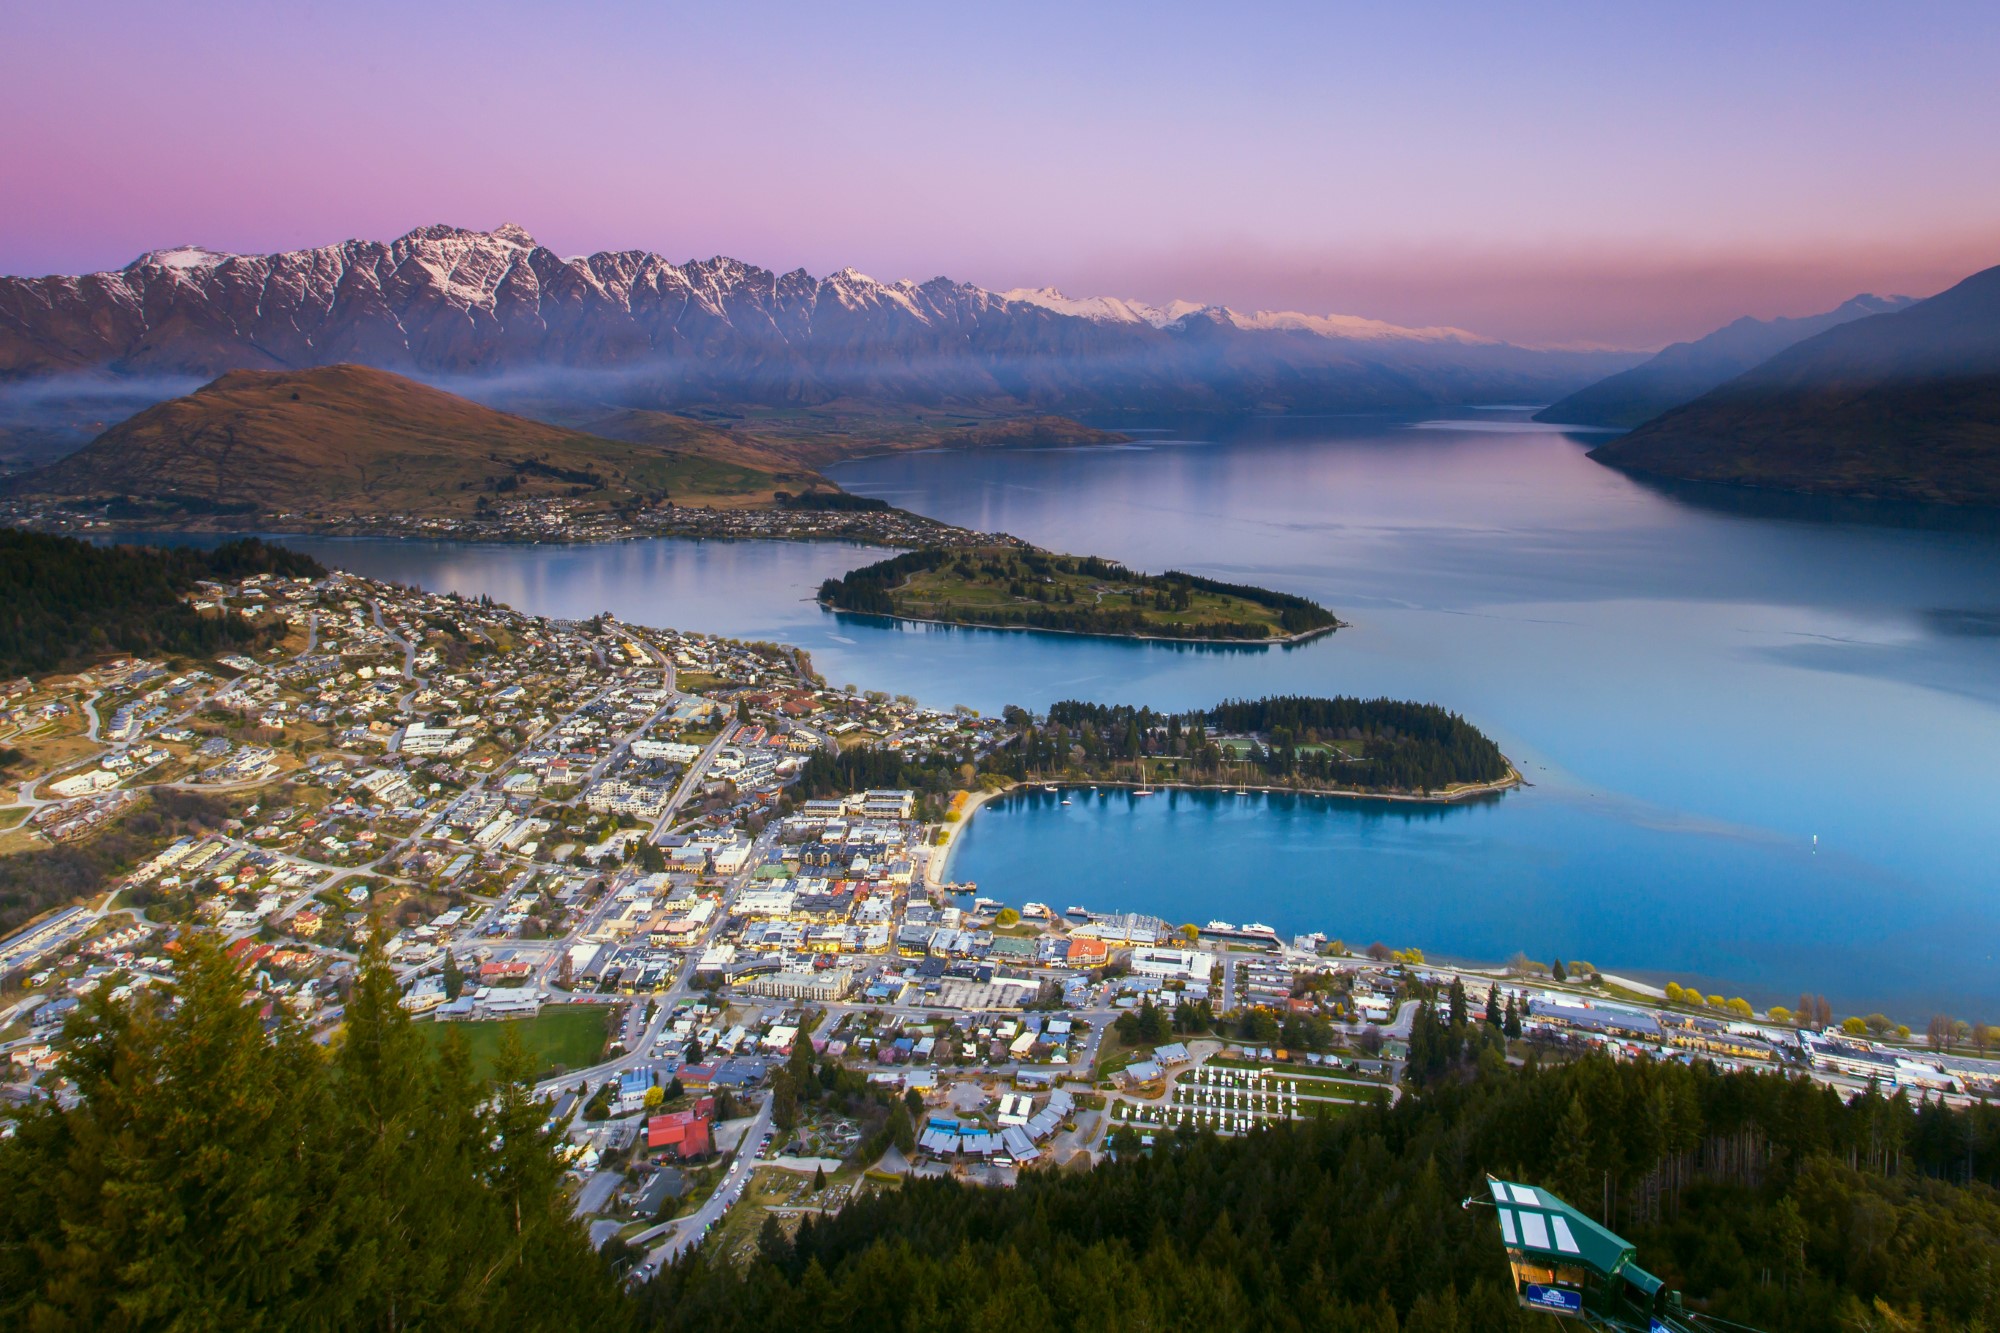 View over lake, mountains, and the town of Queenstown, New Zealand, at sunsetth